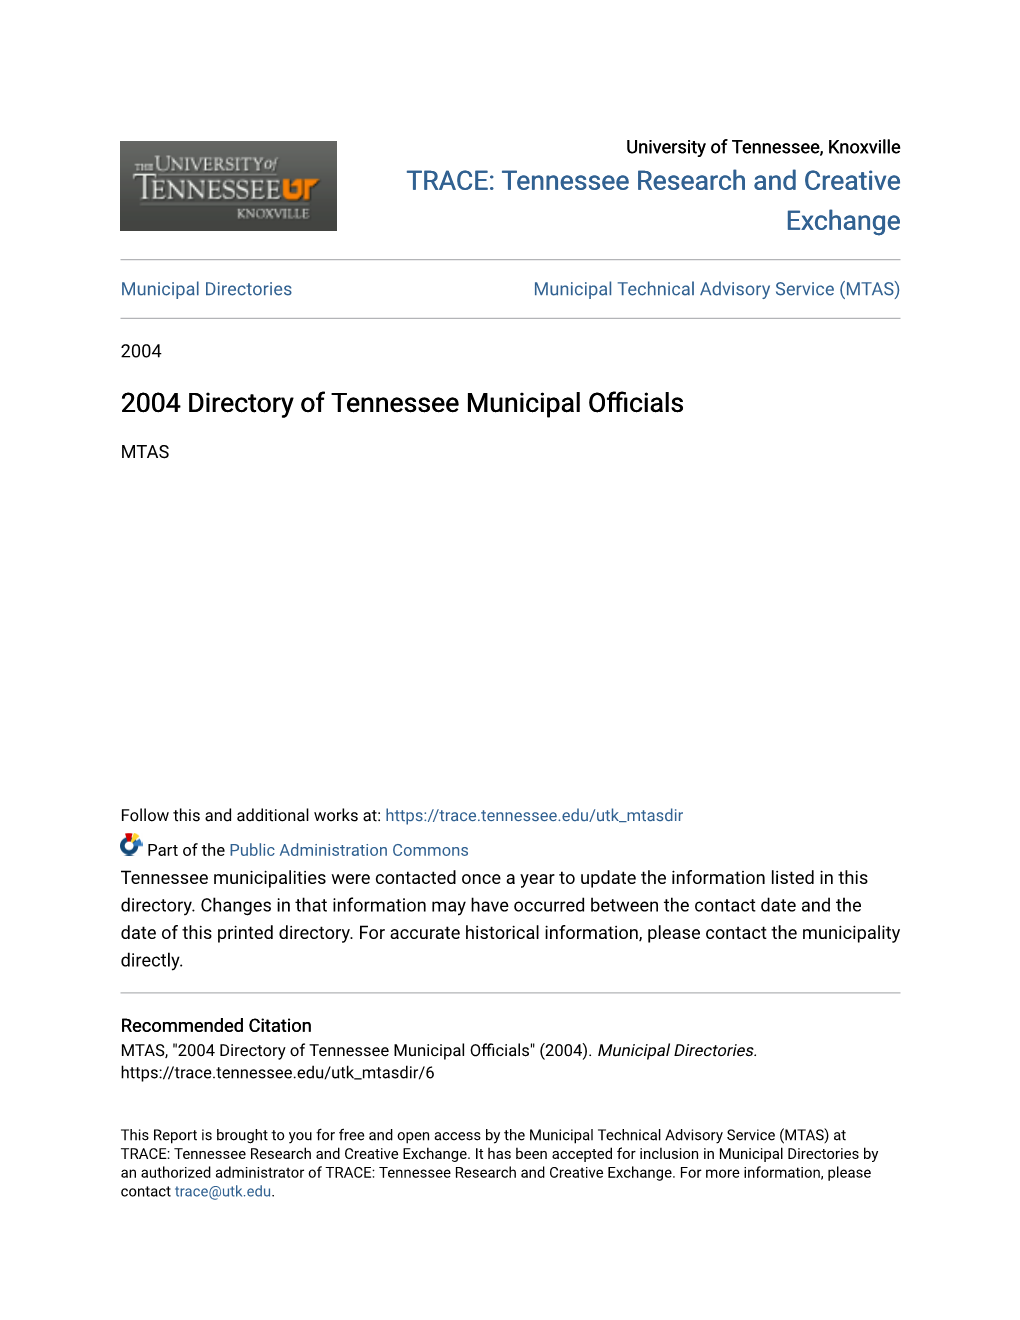 2004 Directory of Tennessee Municipal Officials